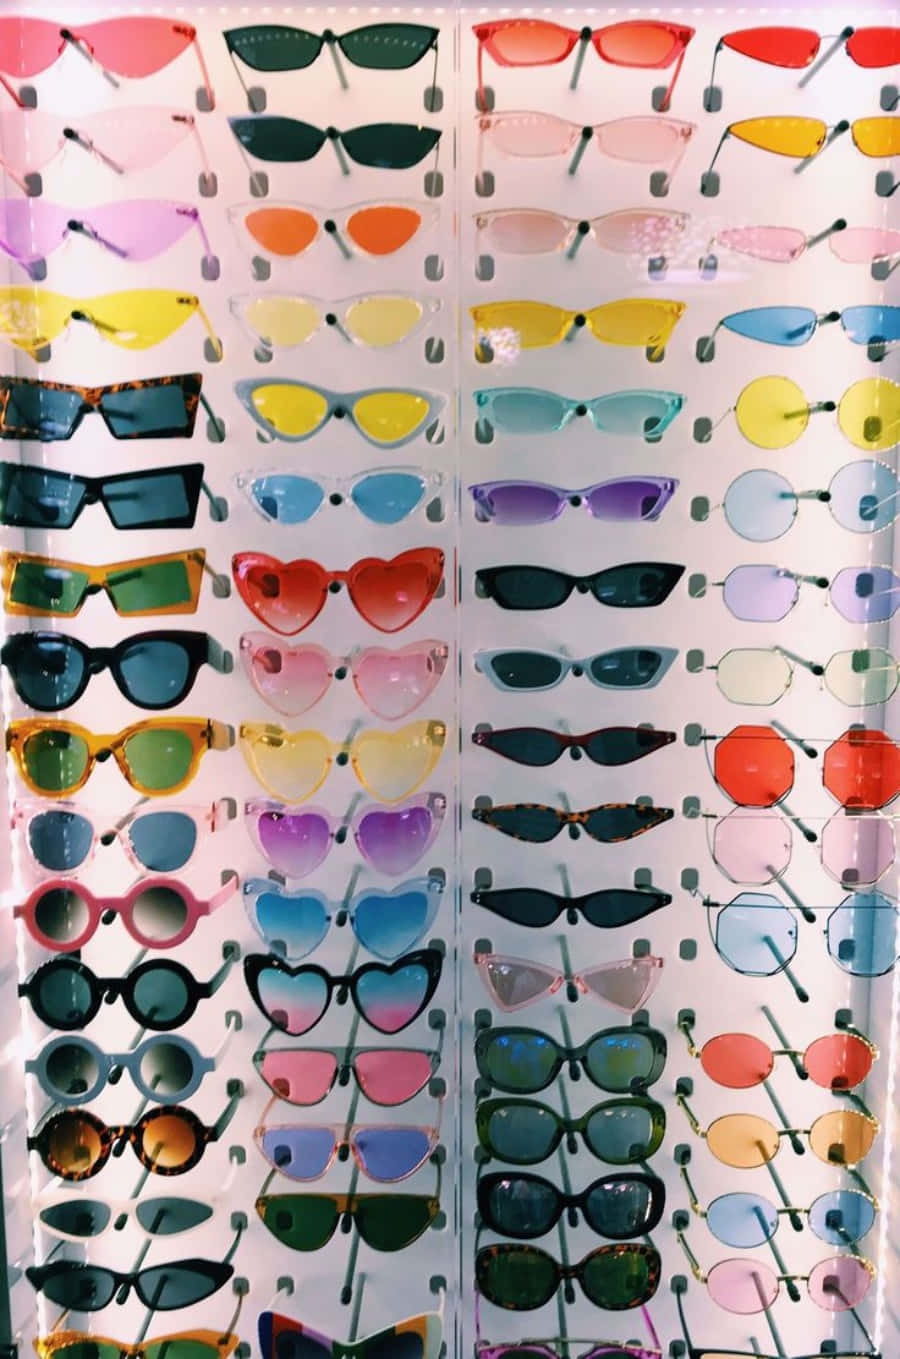 A Display Of Colorful Sunglasses In A Store